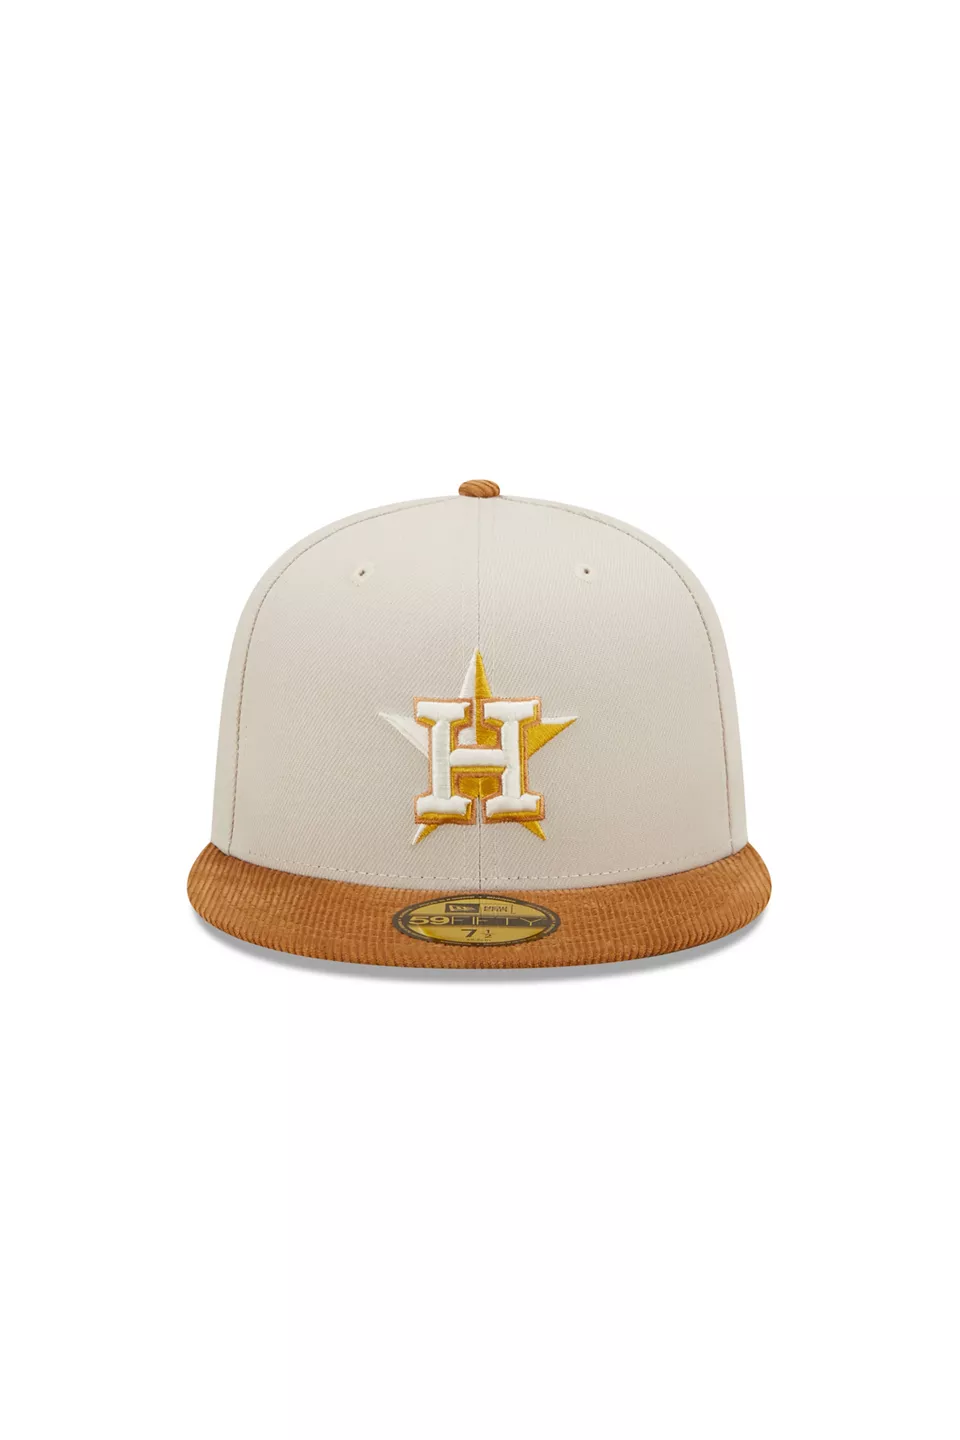 Houston Astros - New Era - 59Fifty Fitted - Gold Collection Cap